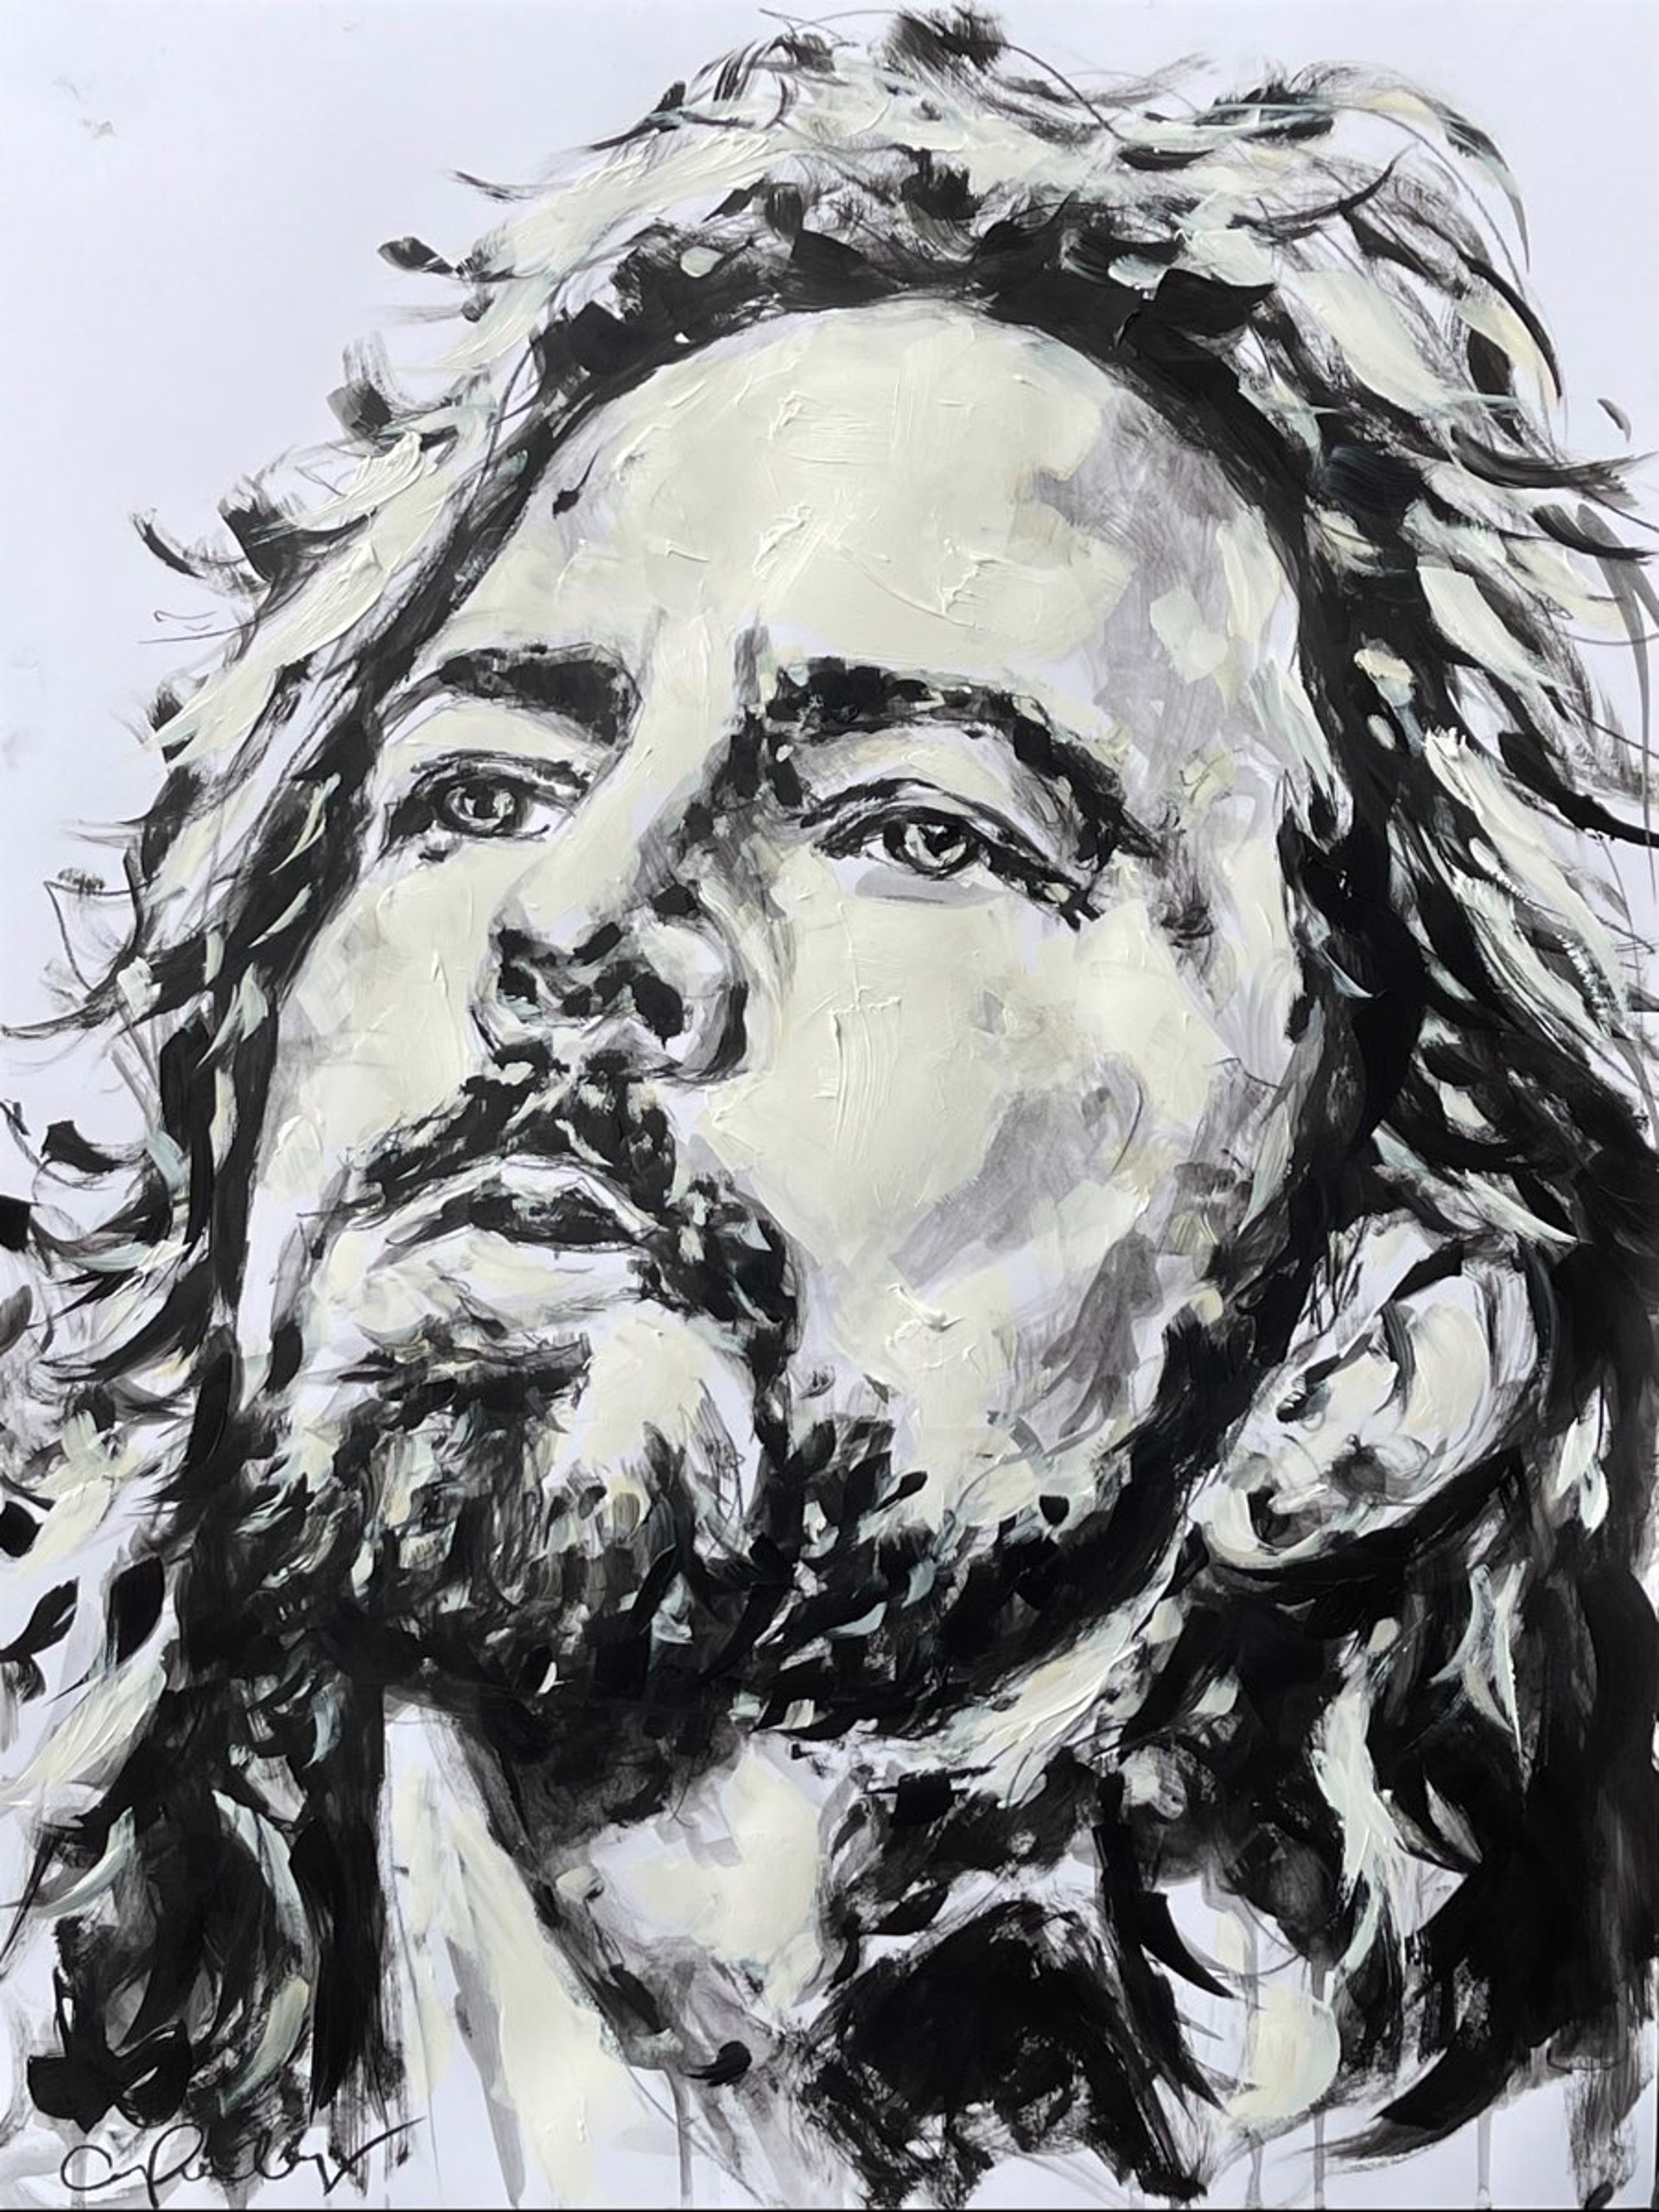 Eddie from Pearl Jam Commission - 2nd Half by Carrie Penley